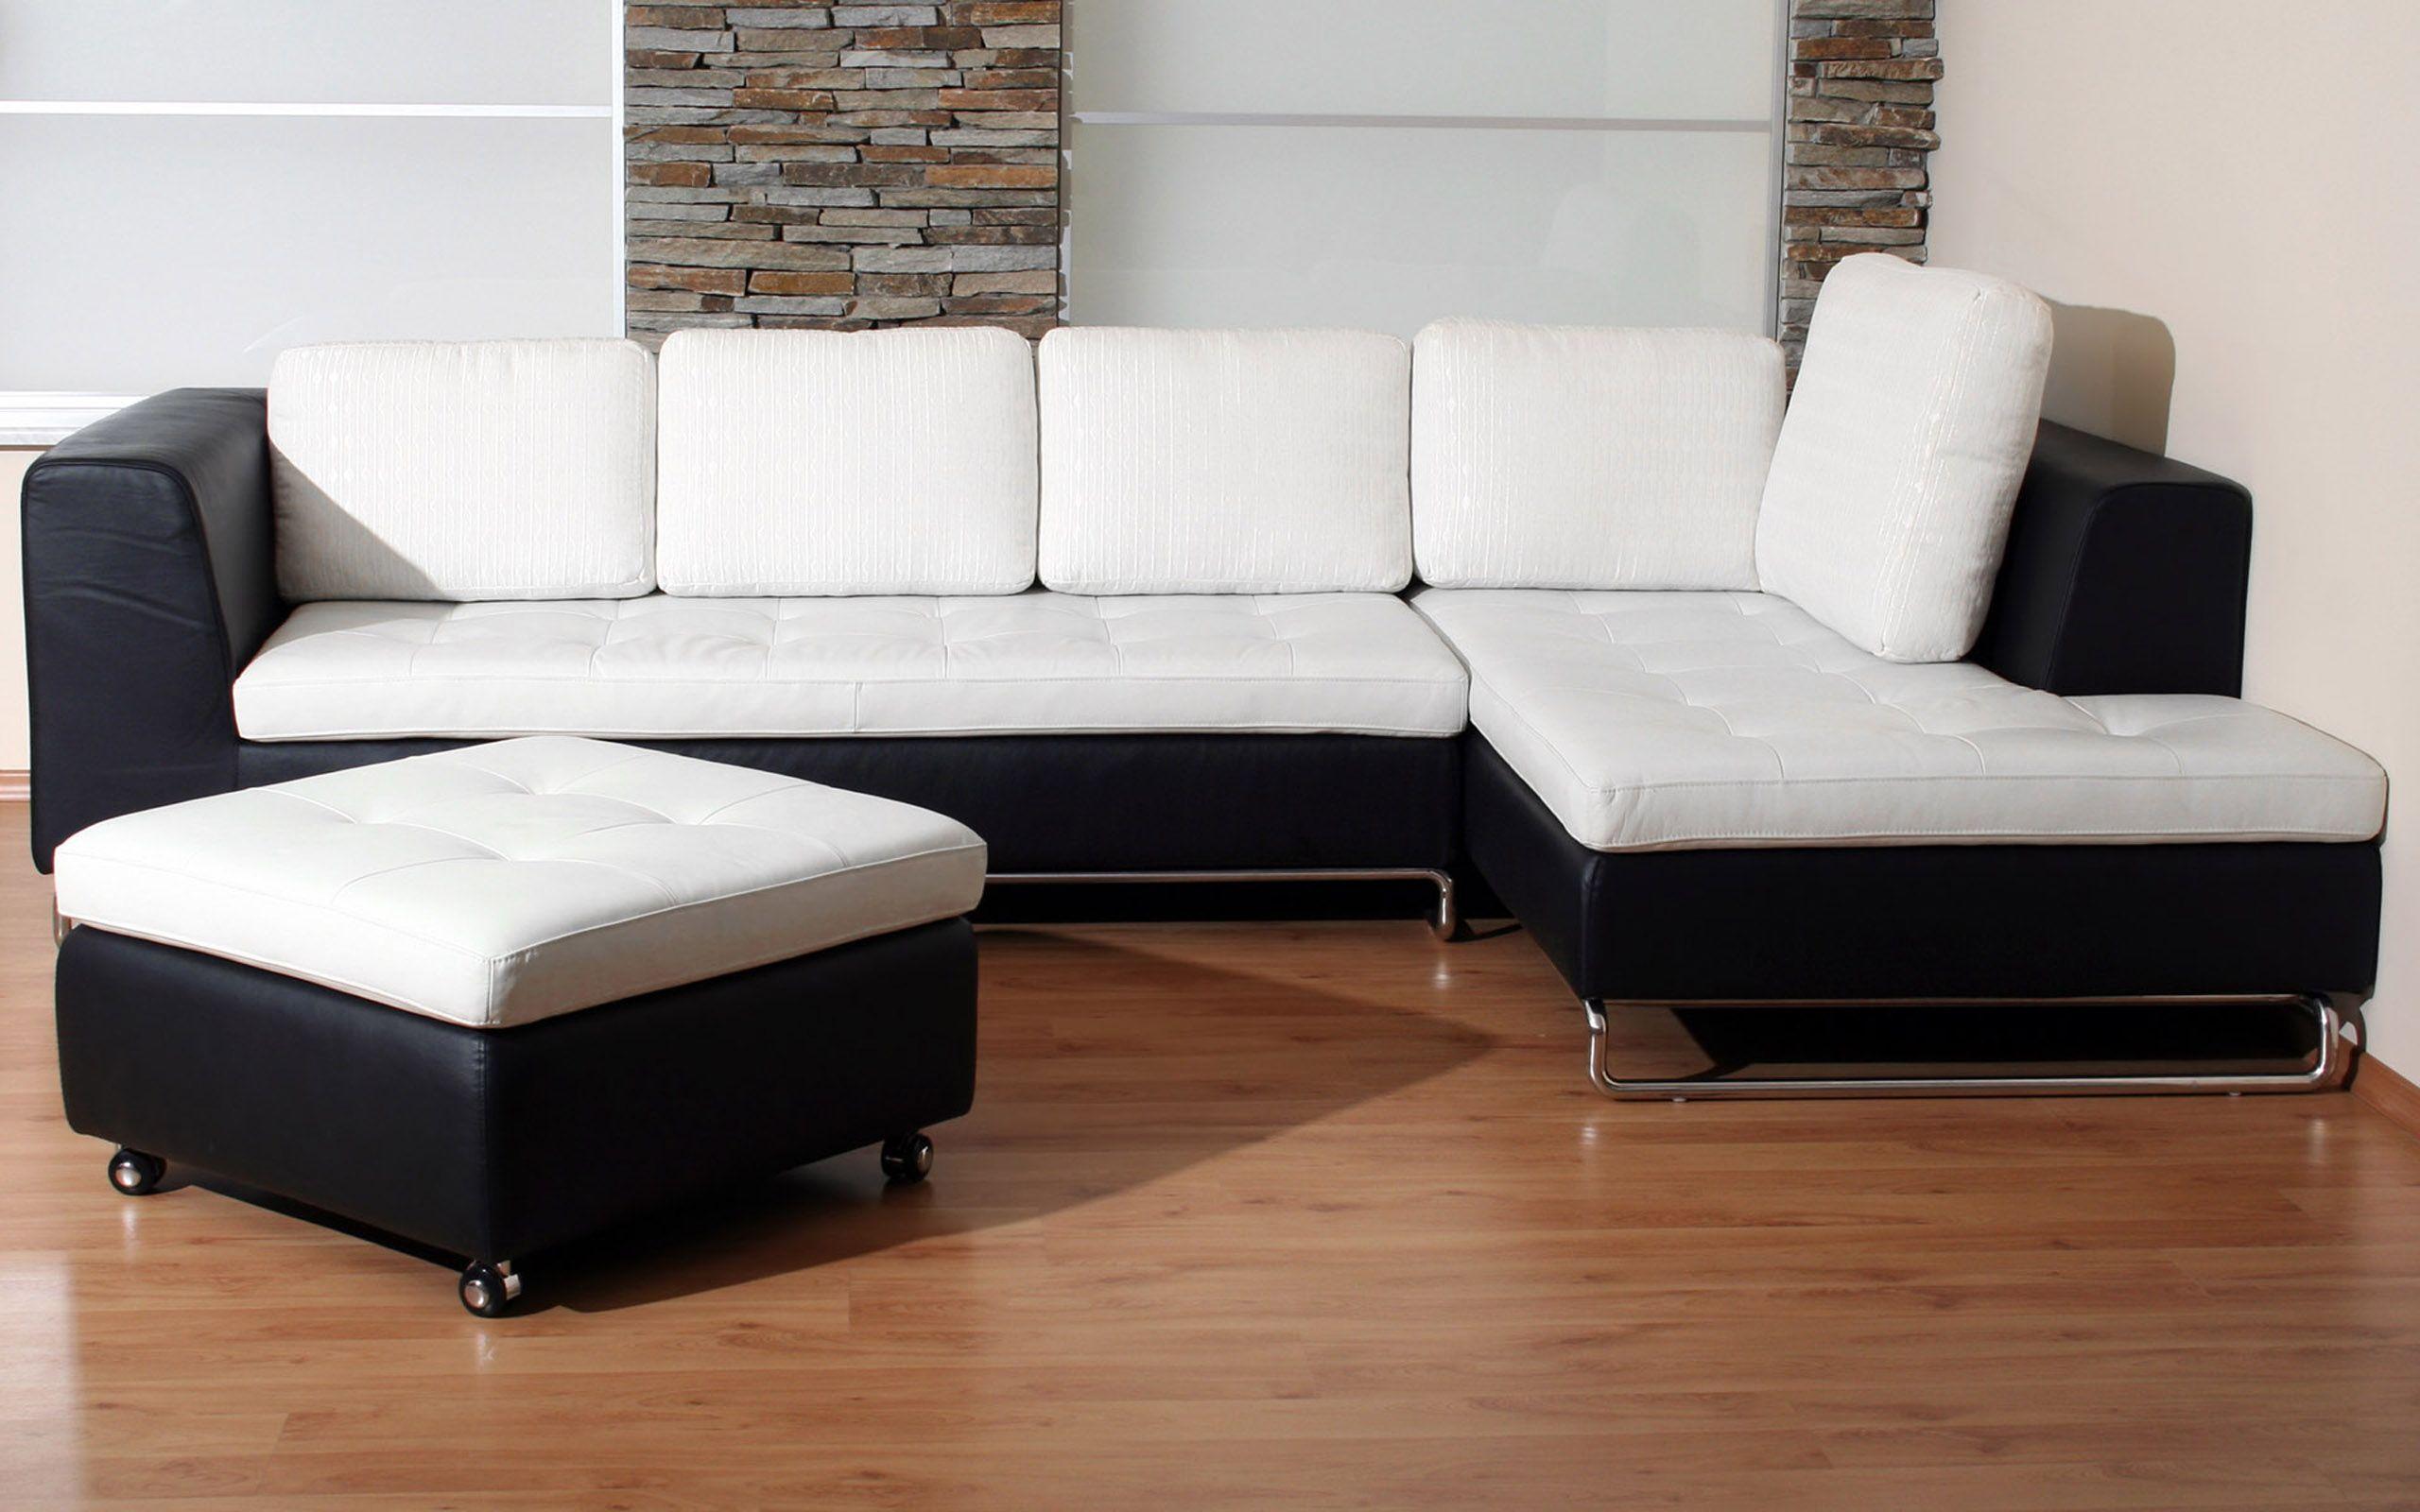 Couch in LIving Room. Free Desktop Wallpaper for Widescreen, HD